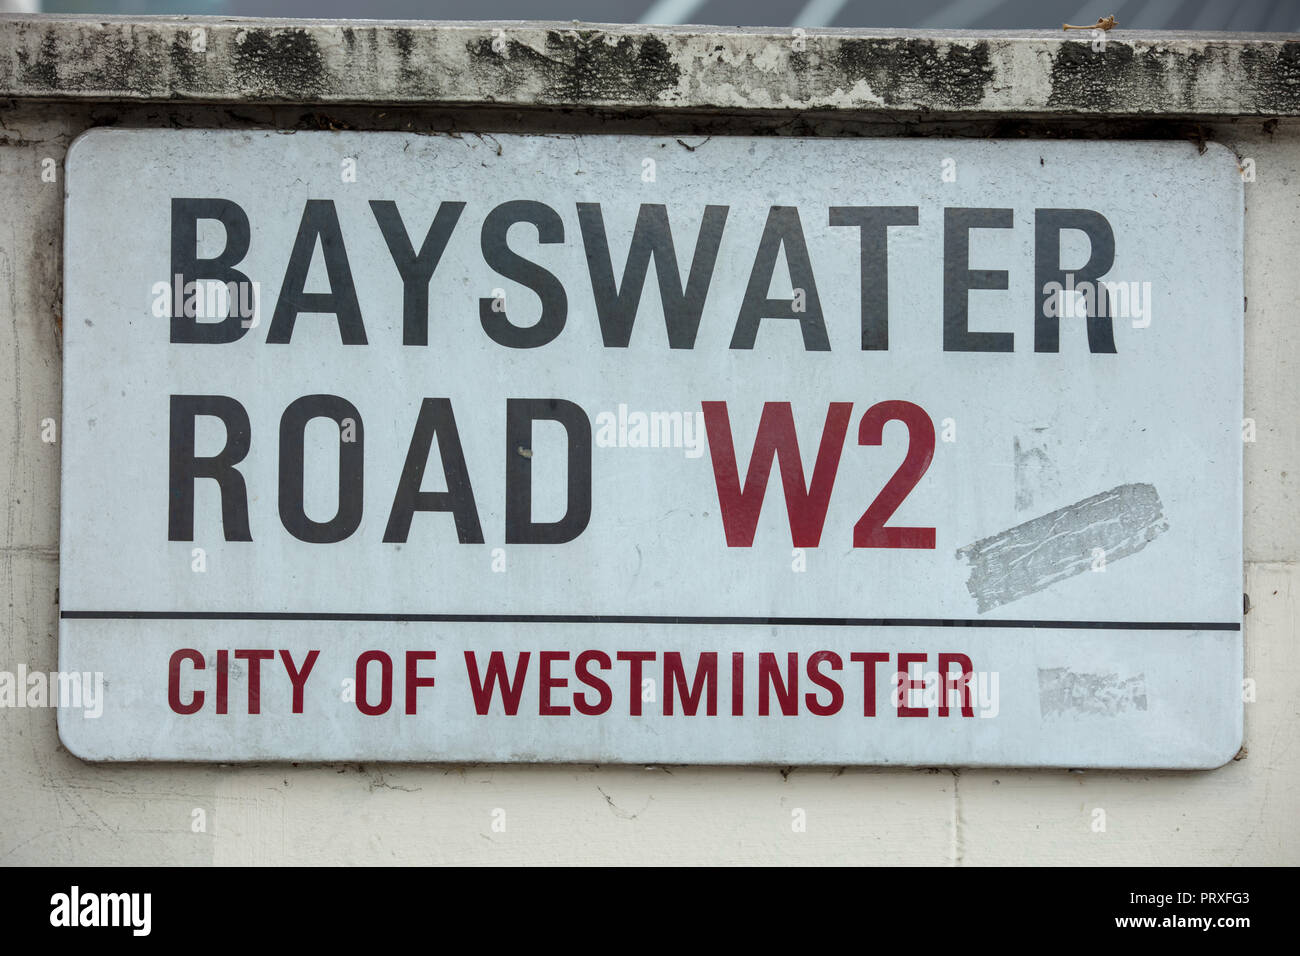 London, UK, street and road sign of Bayswater Road W2, in the City of Westminster. Stock Photo